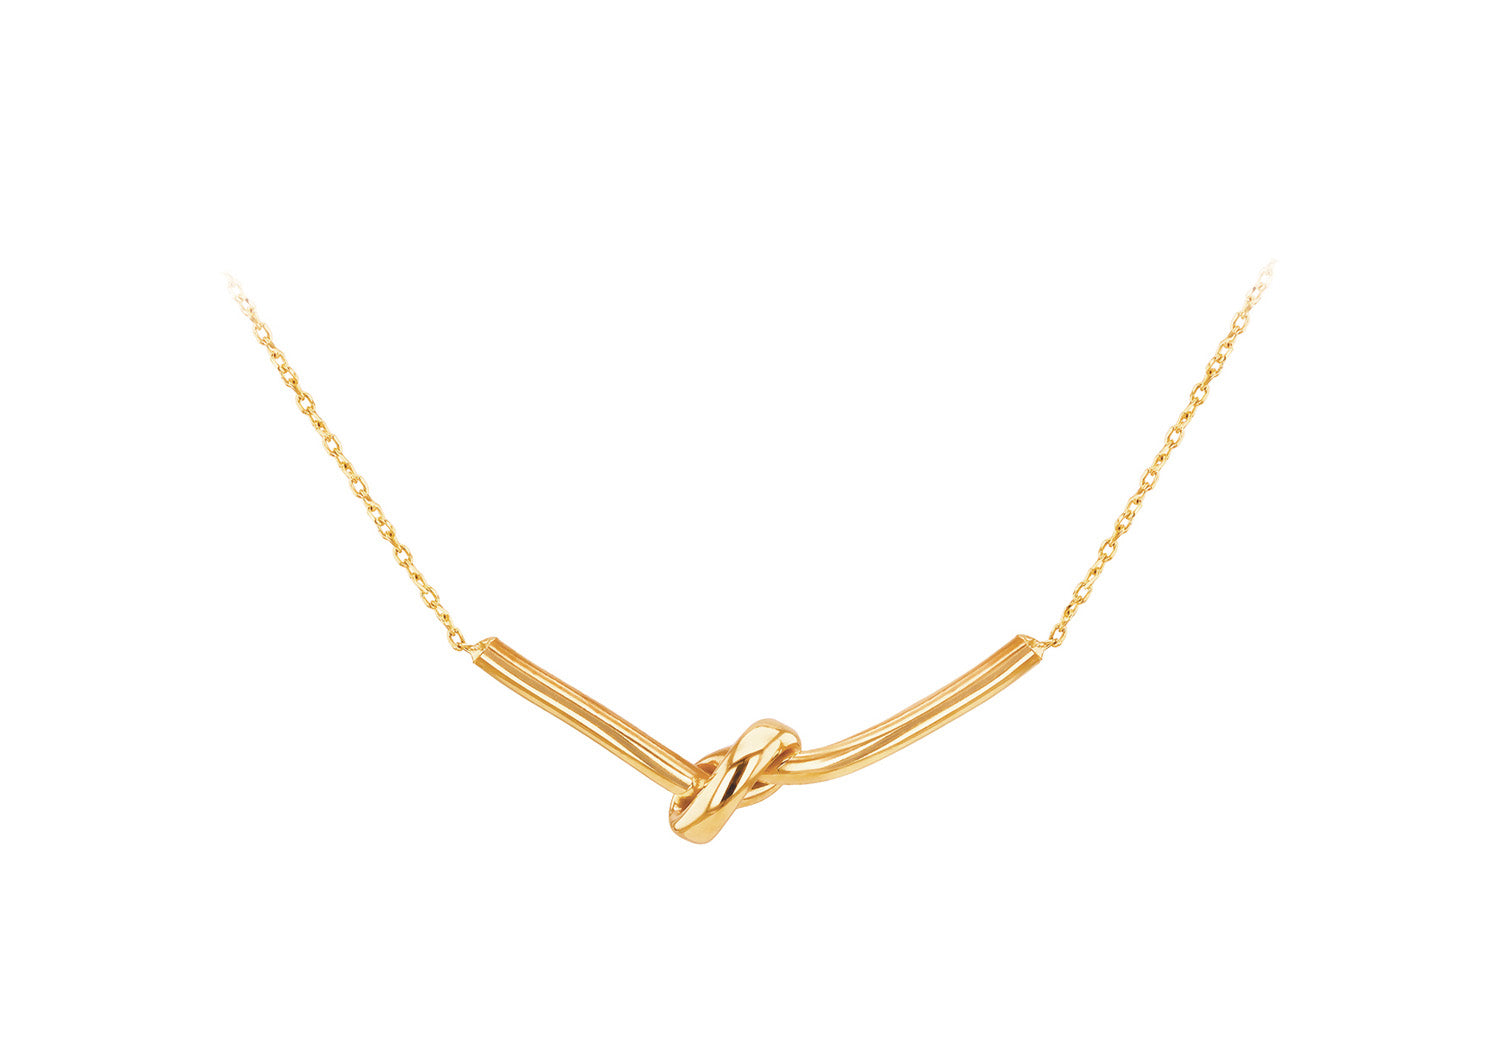 Knotted Bar Necklace in 9ct Yellow Gold